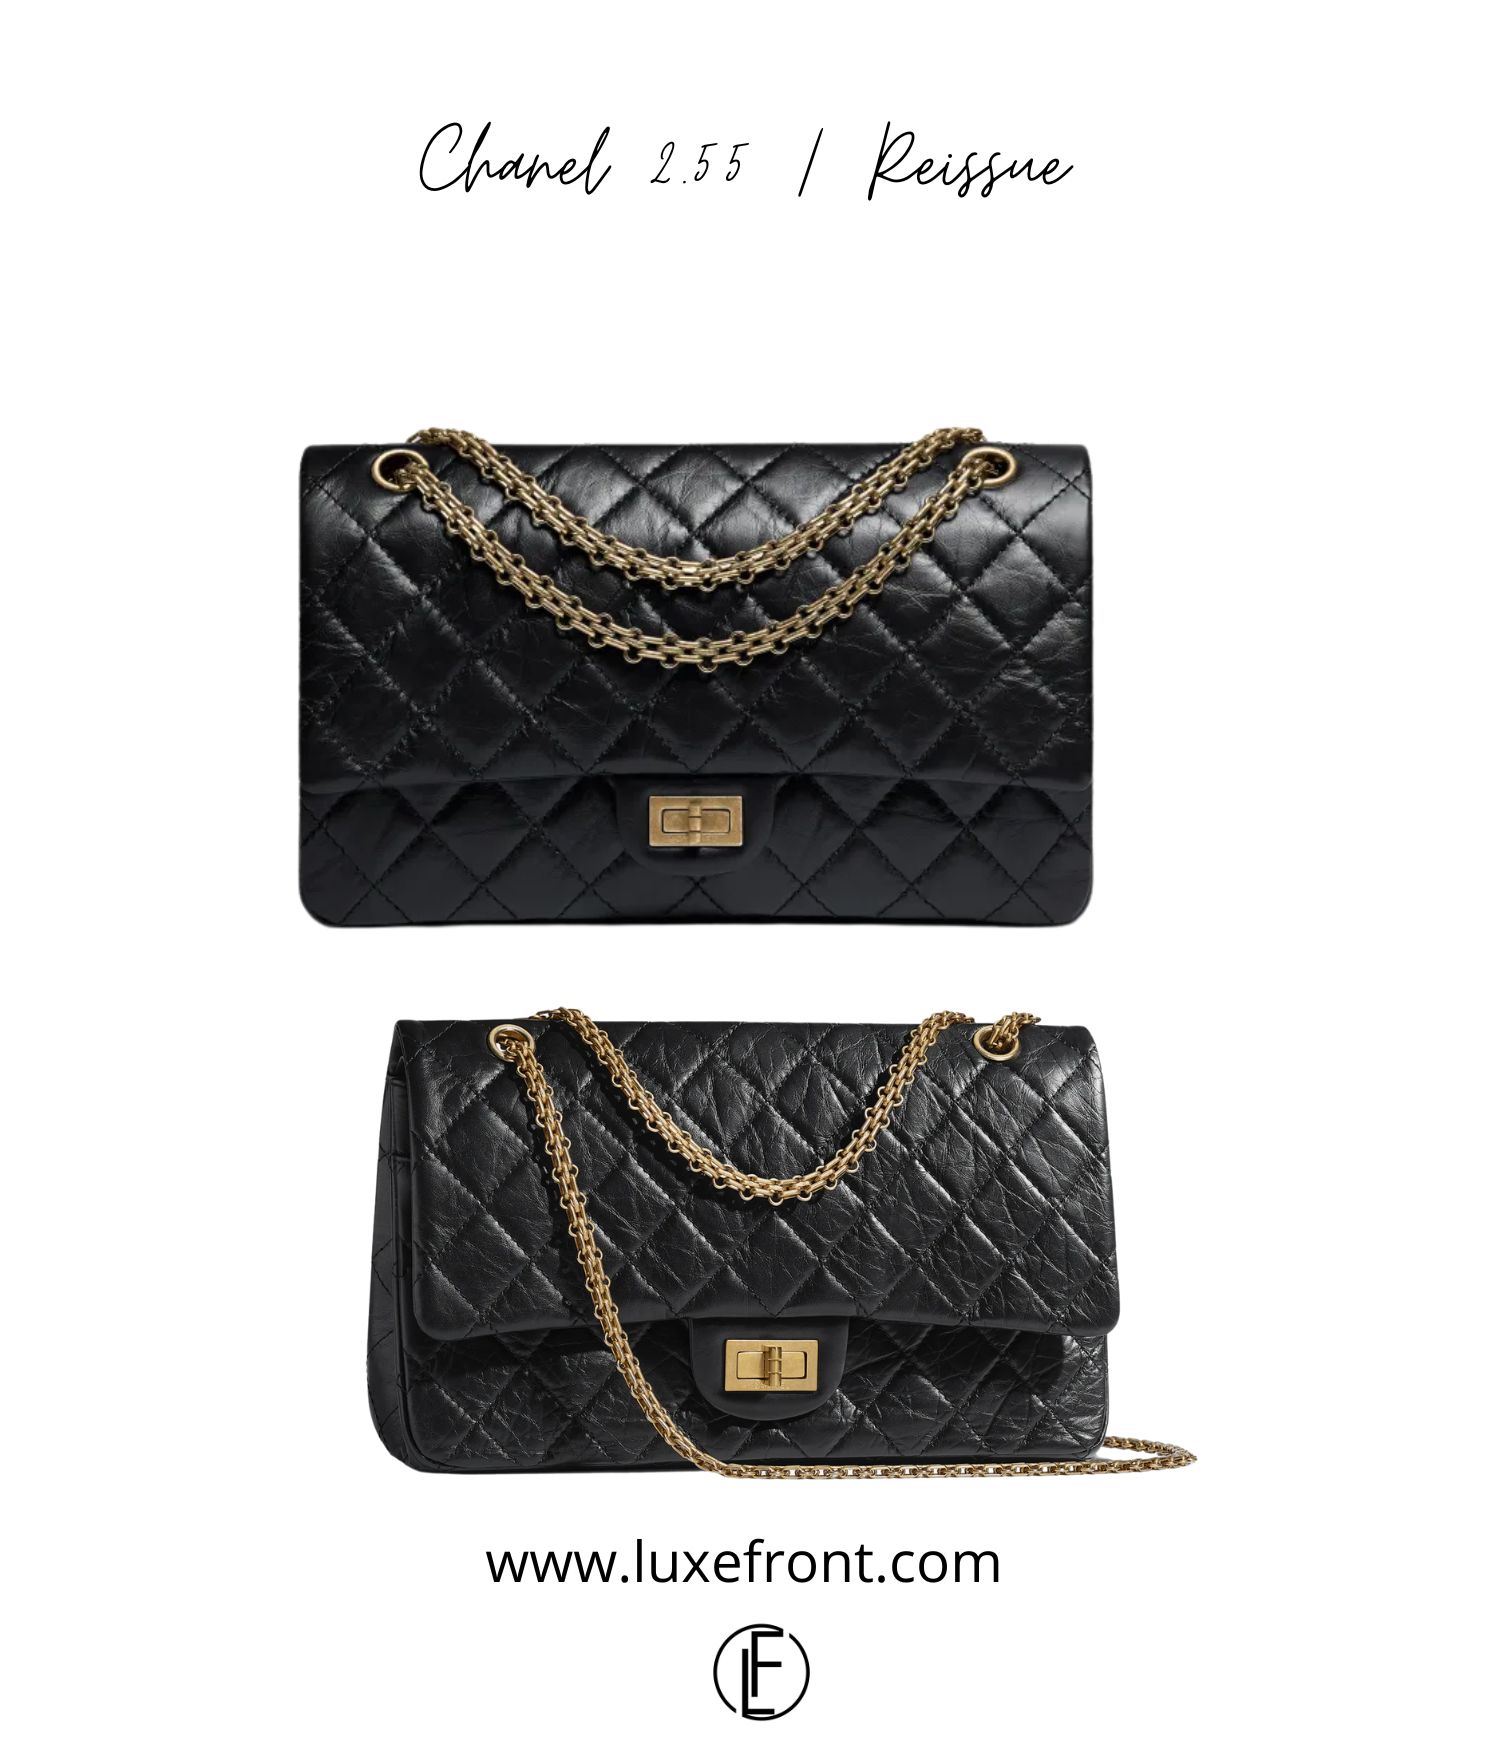 Why should you invest in Chanel bags today Is It Worth It